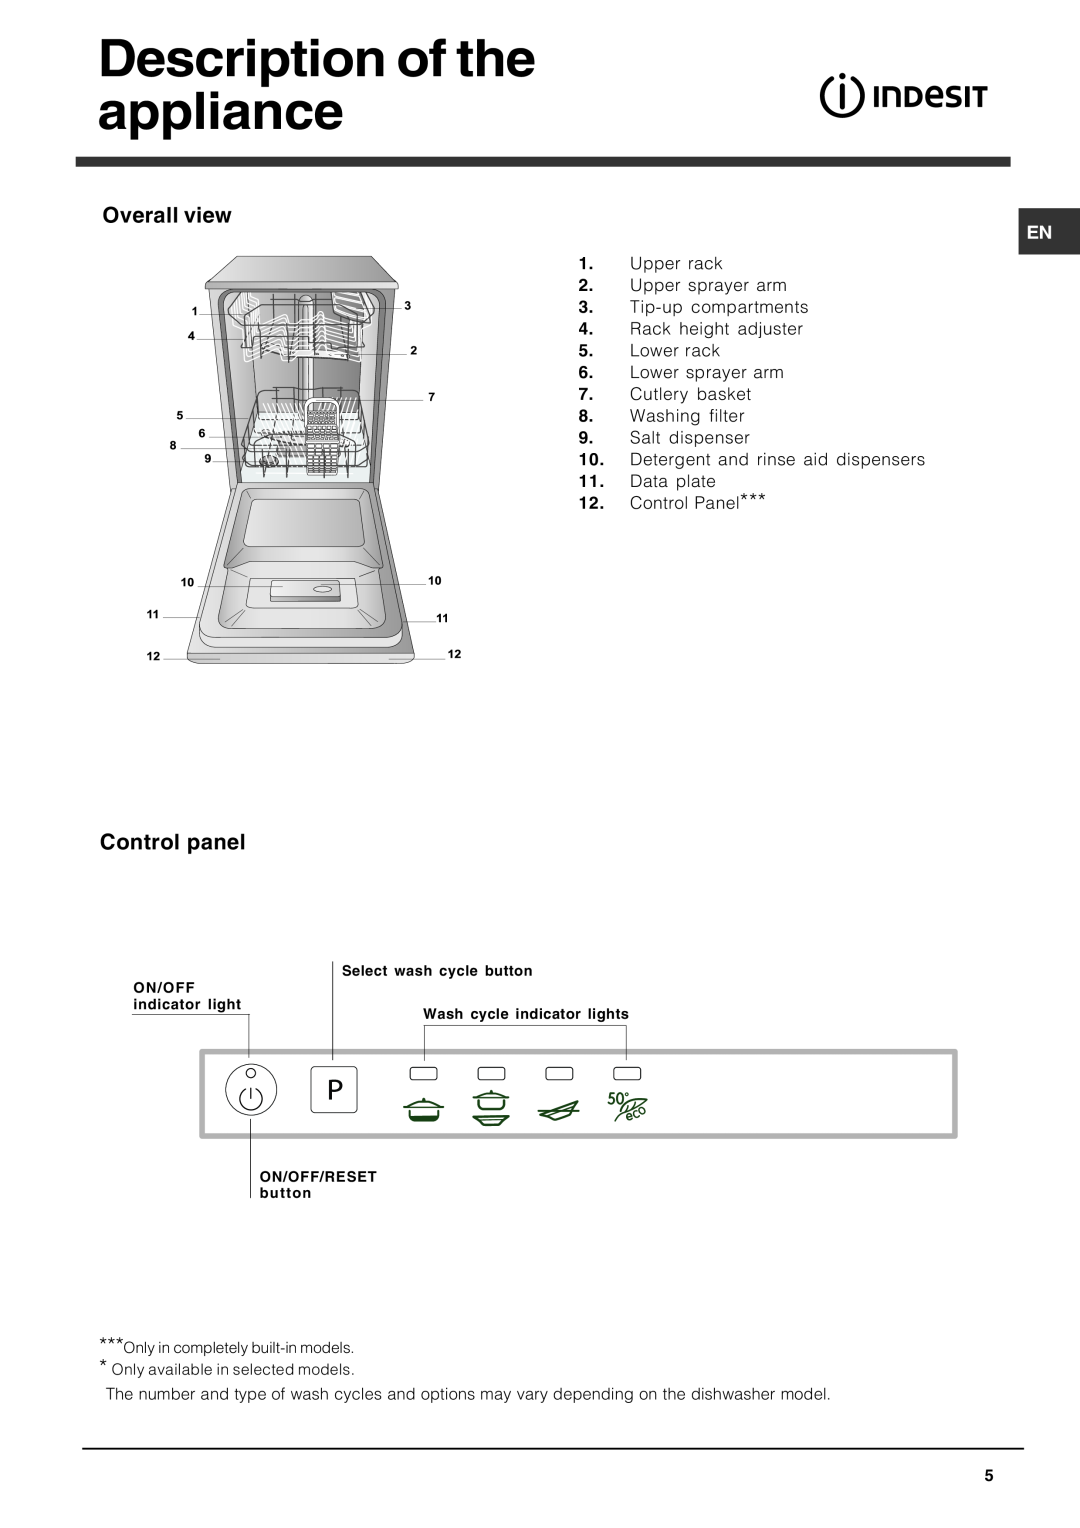 Indesit DIS 04 operating instructions Description of the appliance, Overall view, Control panel 